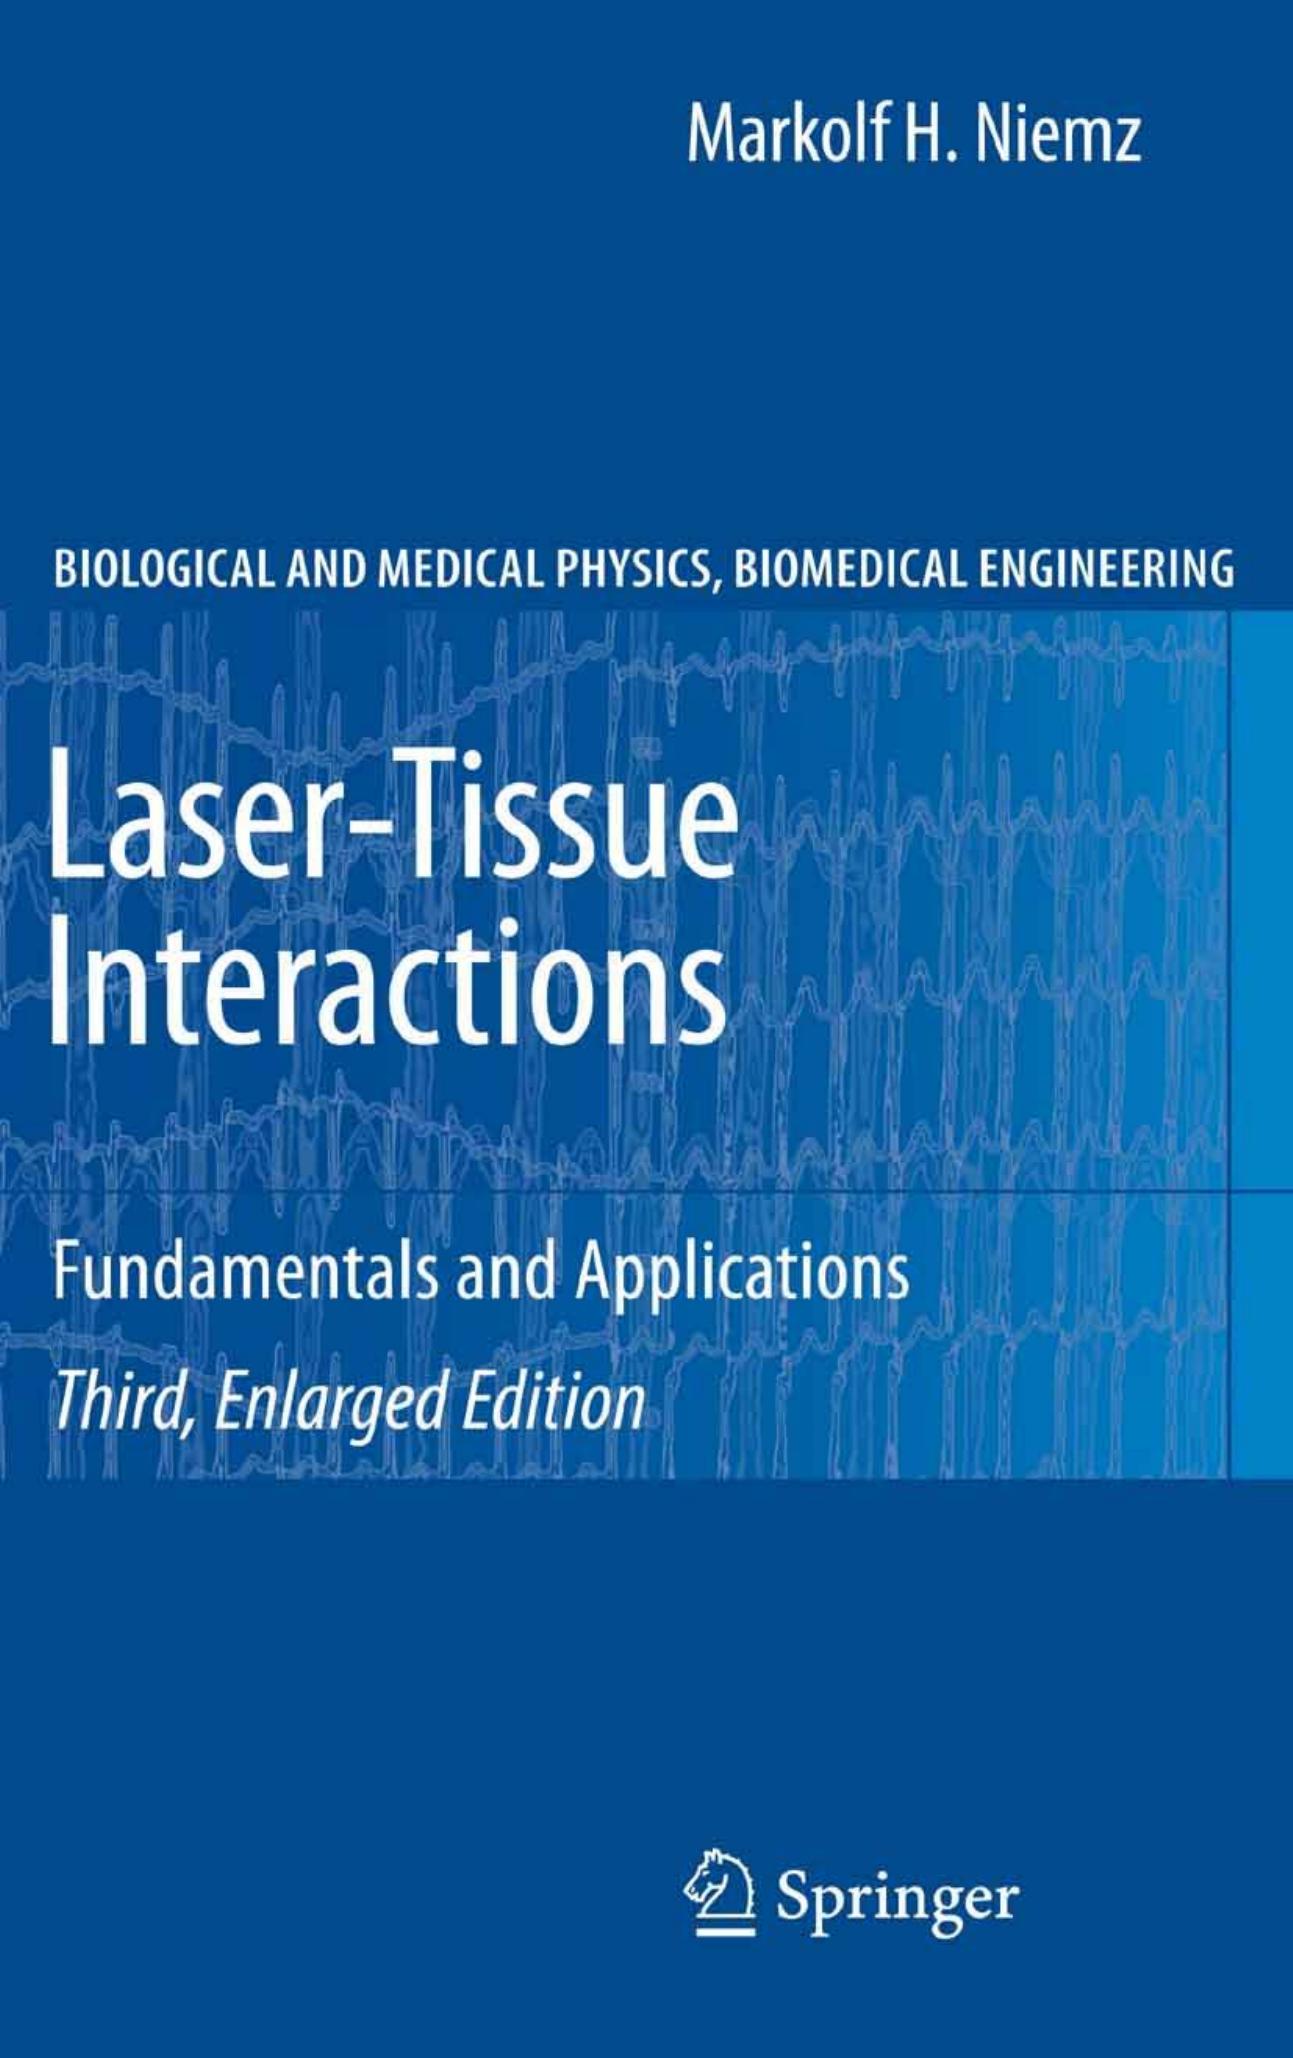 Laser-Tissue Interactions Fundamentals and Applications -2007